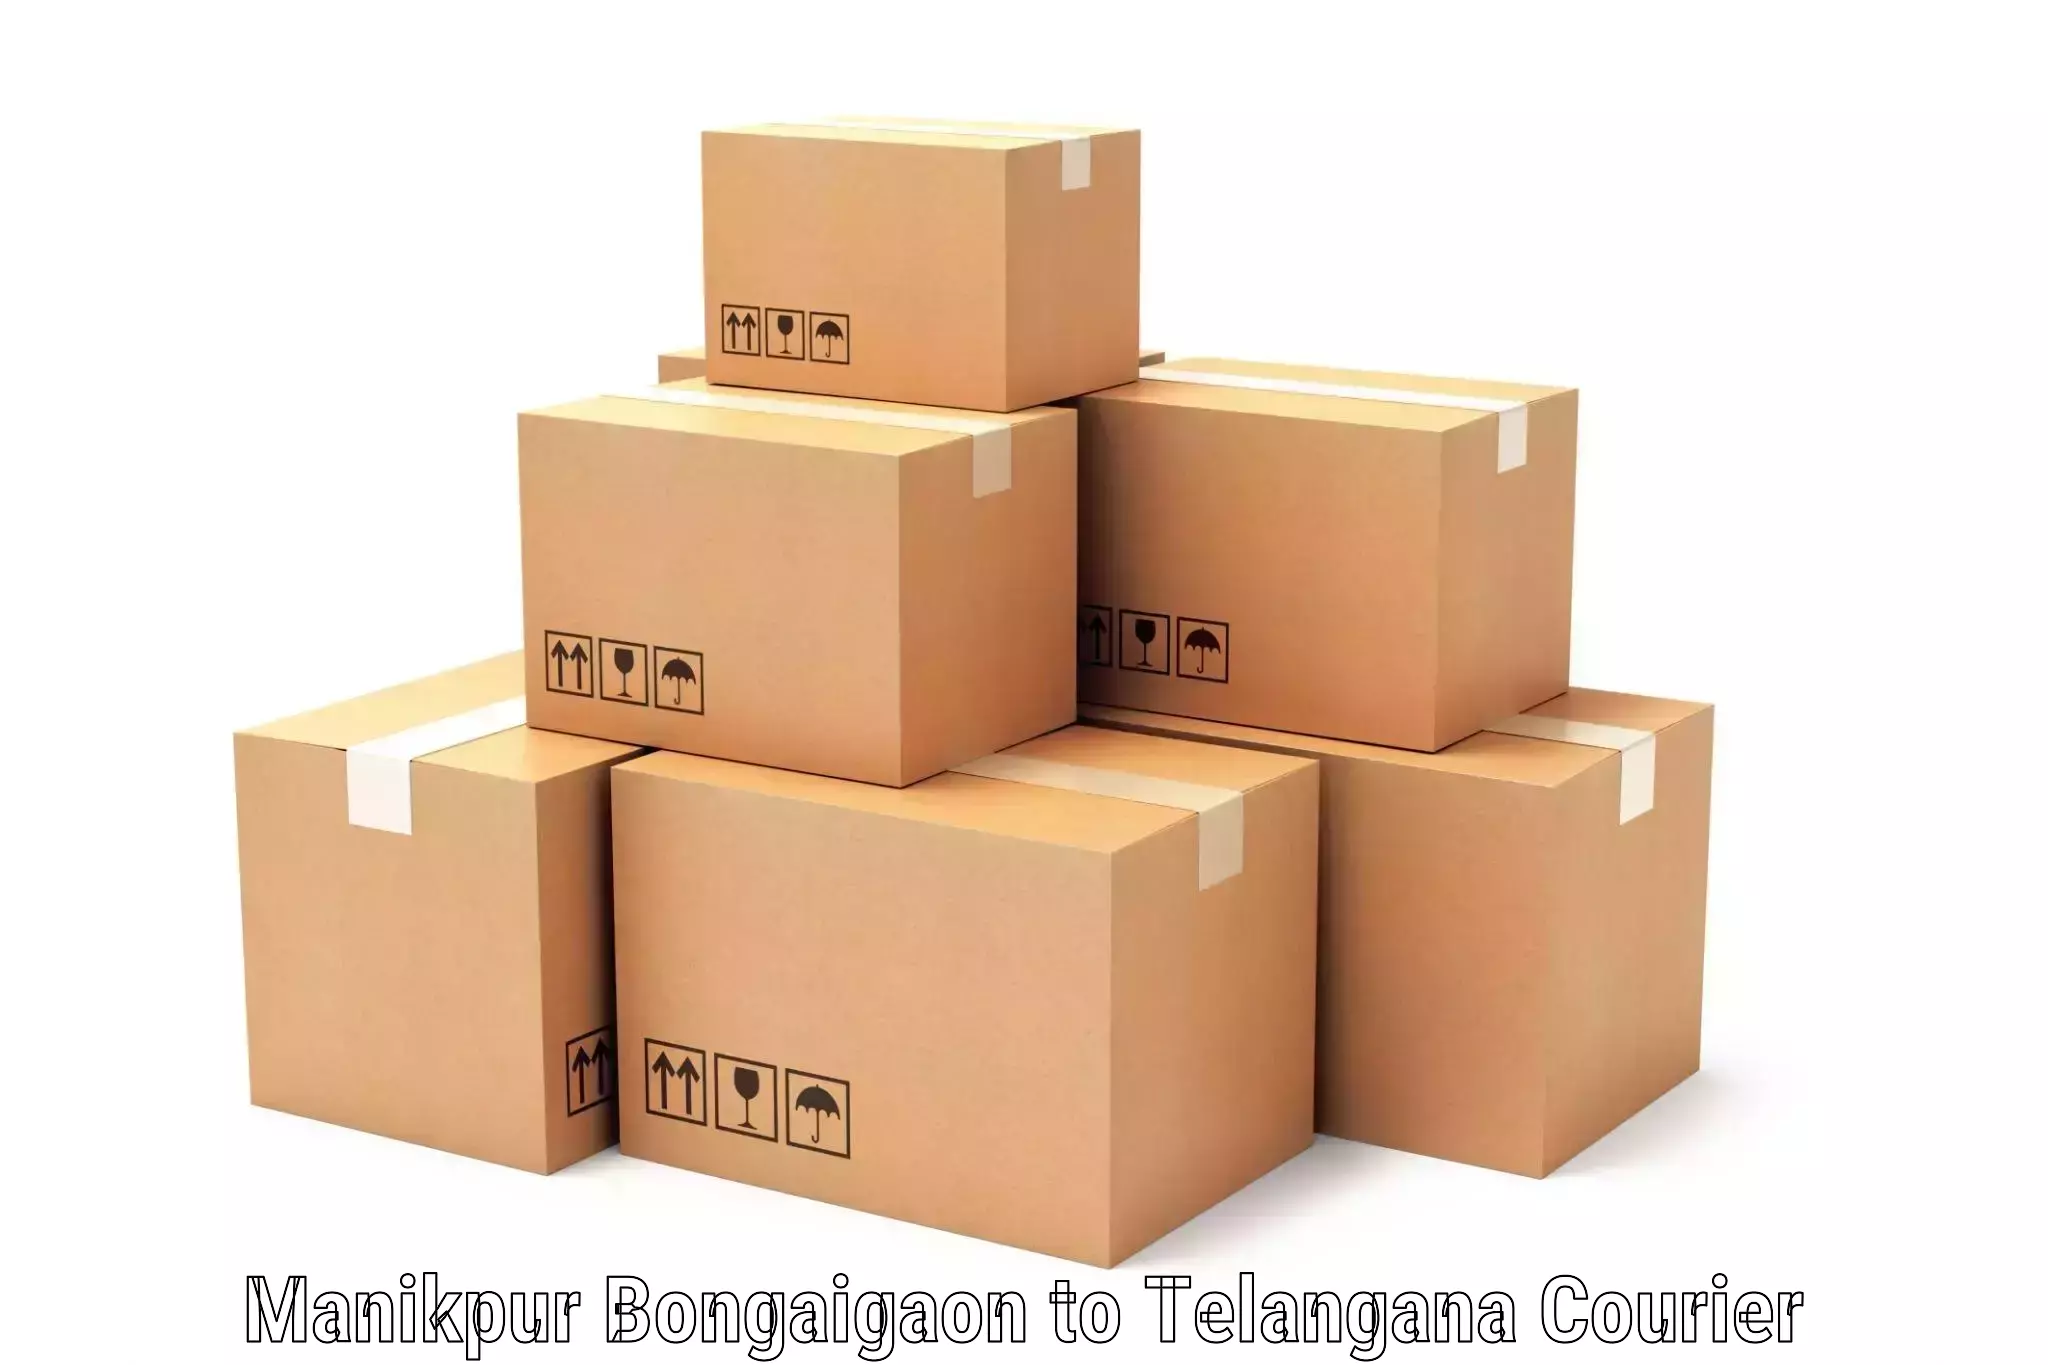 Comprehensive delivery network Manikpur Bongaigaon to Narayanpet